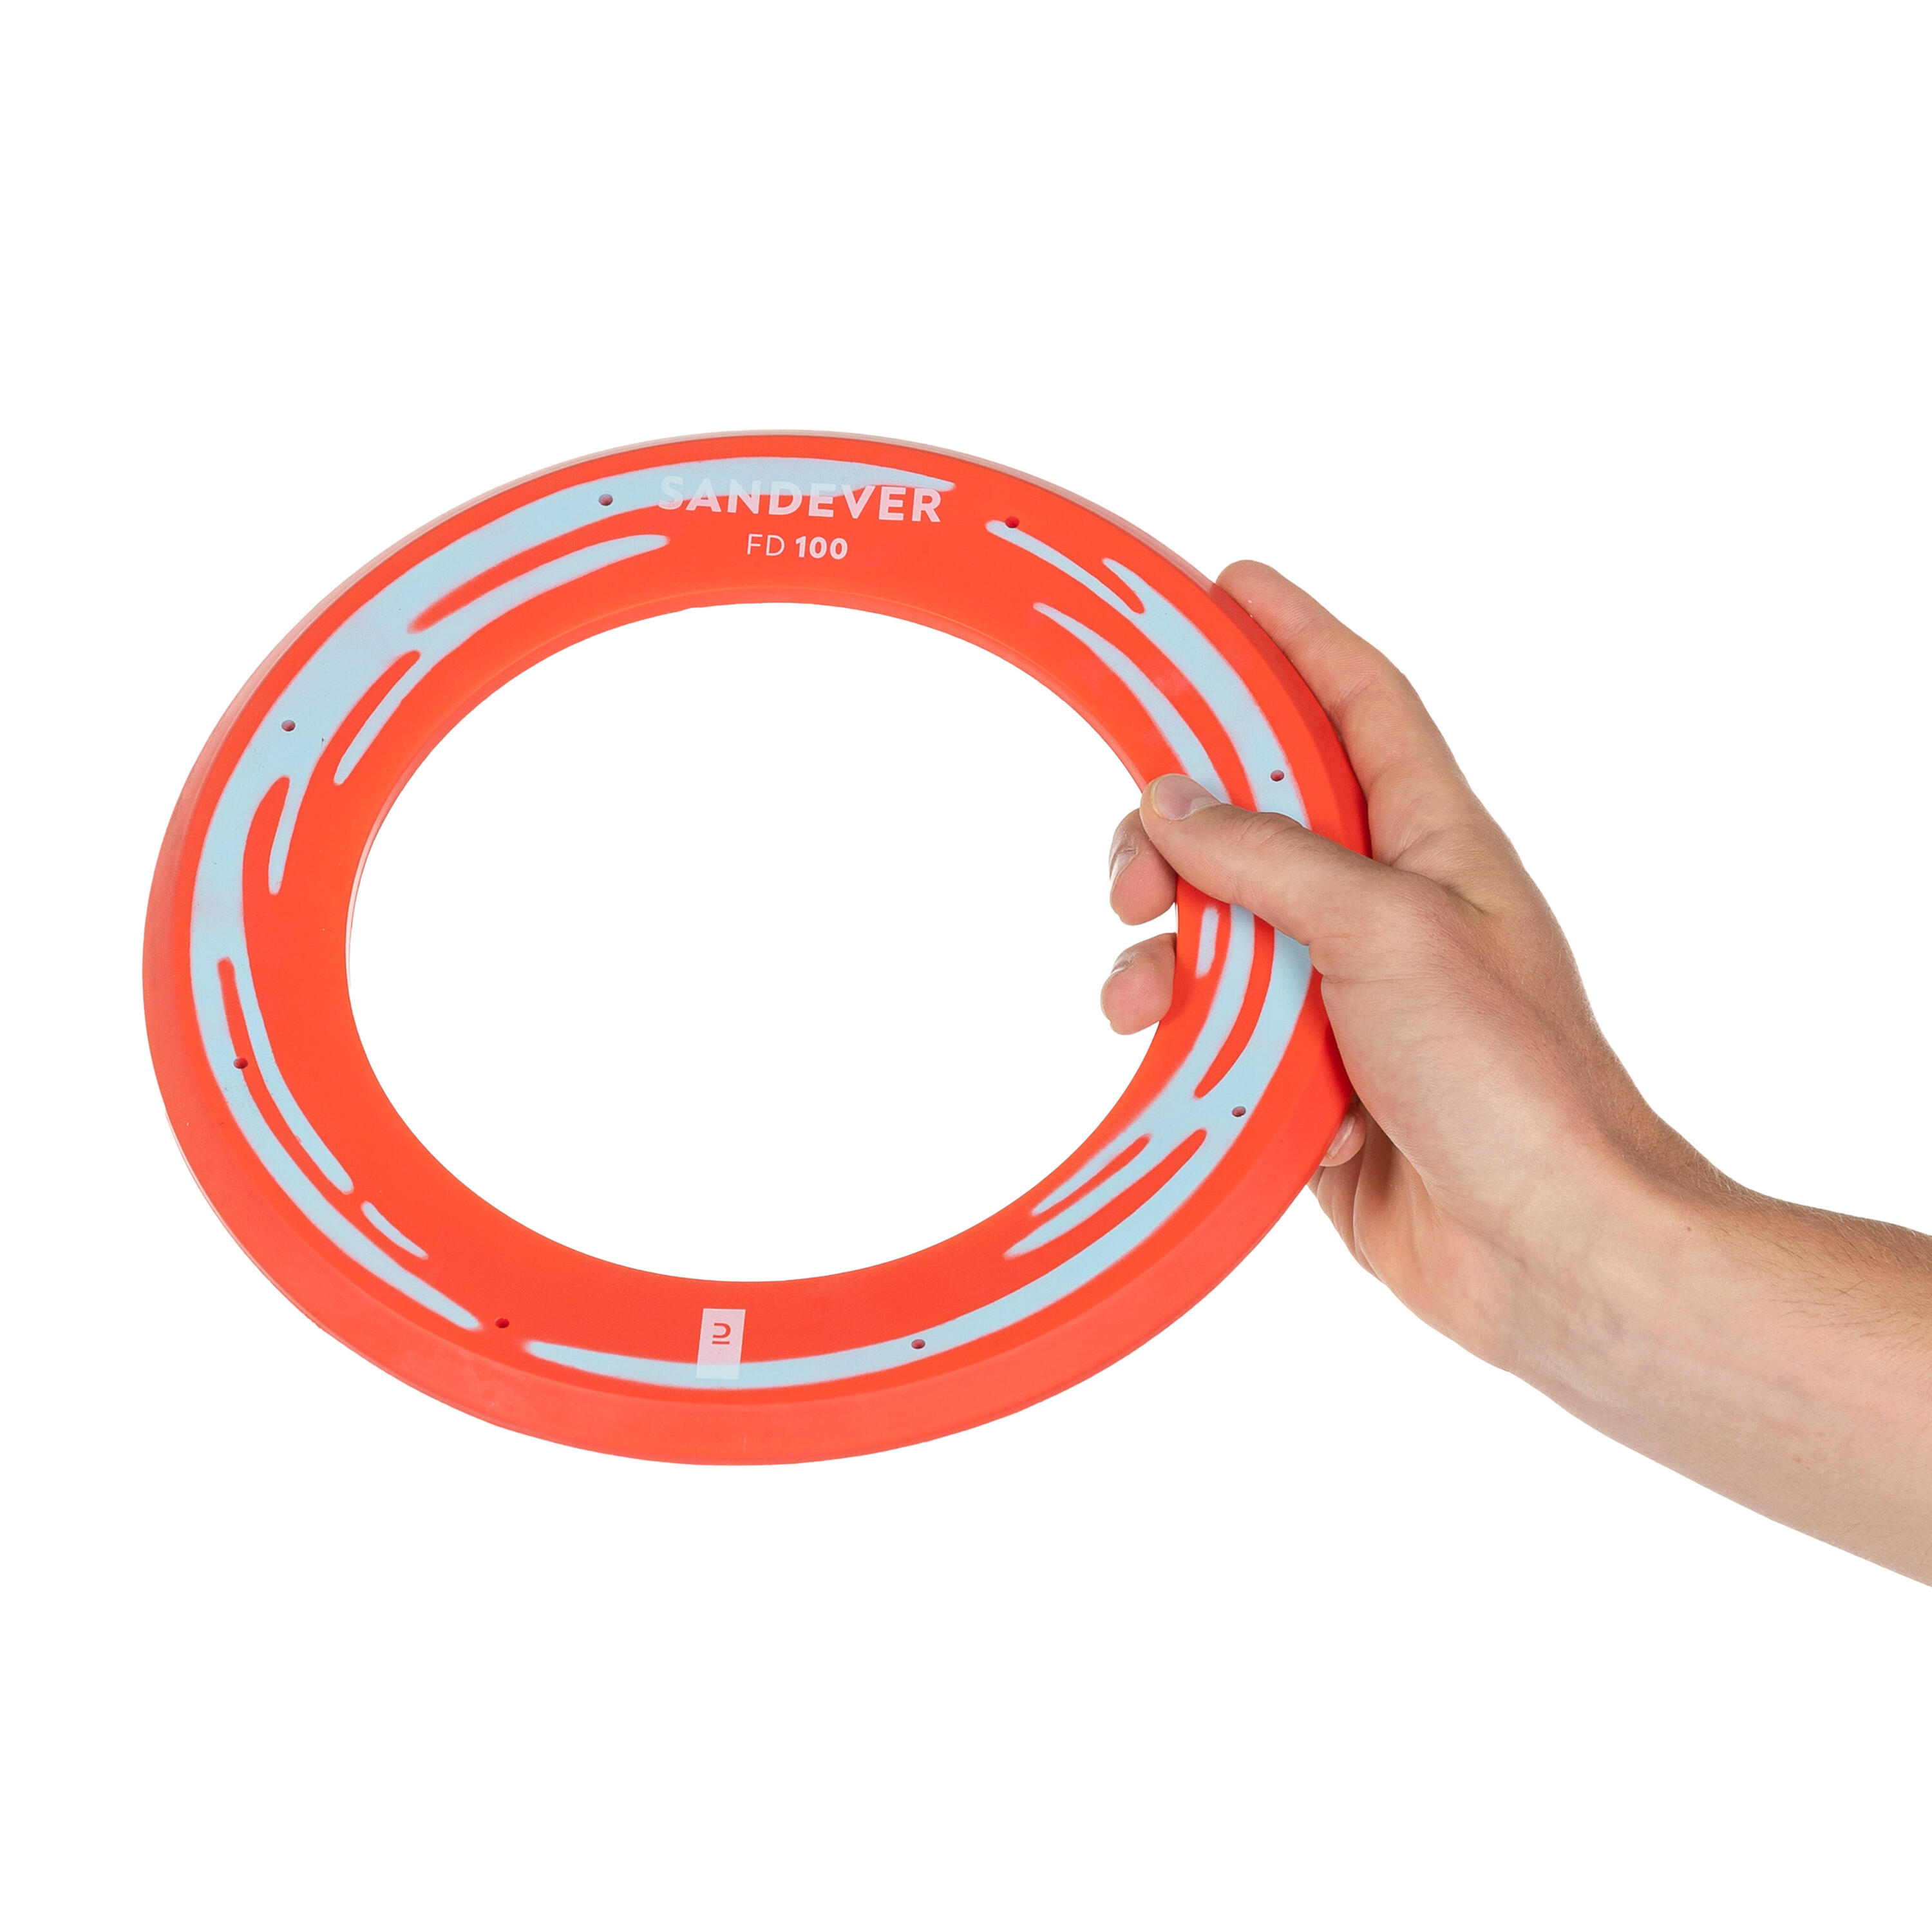 A soft red disc for long-distance throws. 3/6